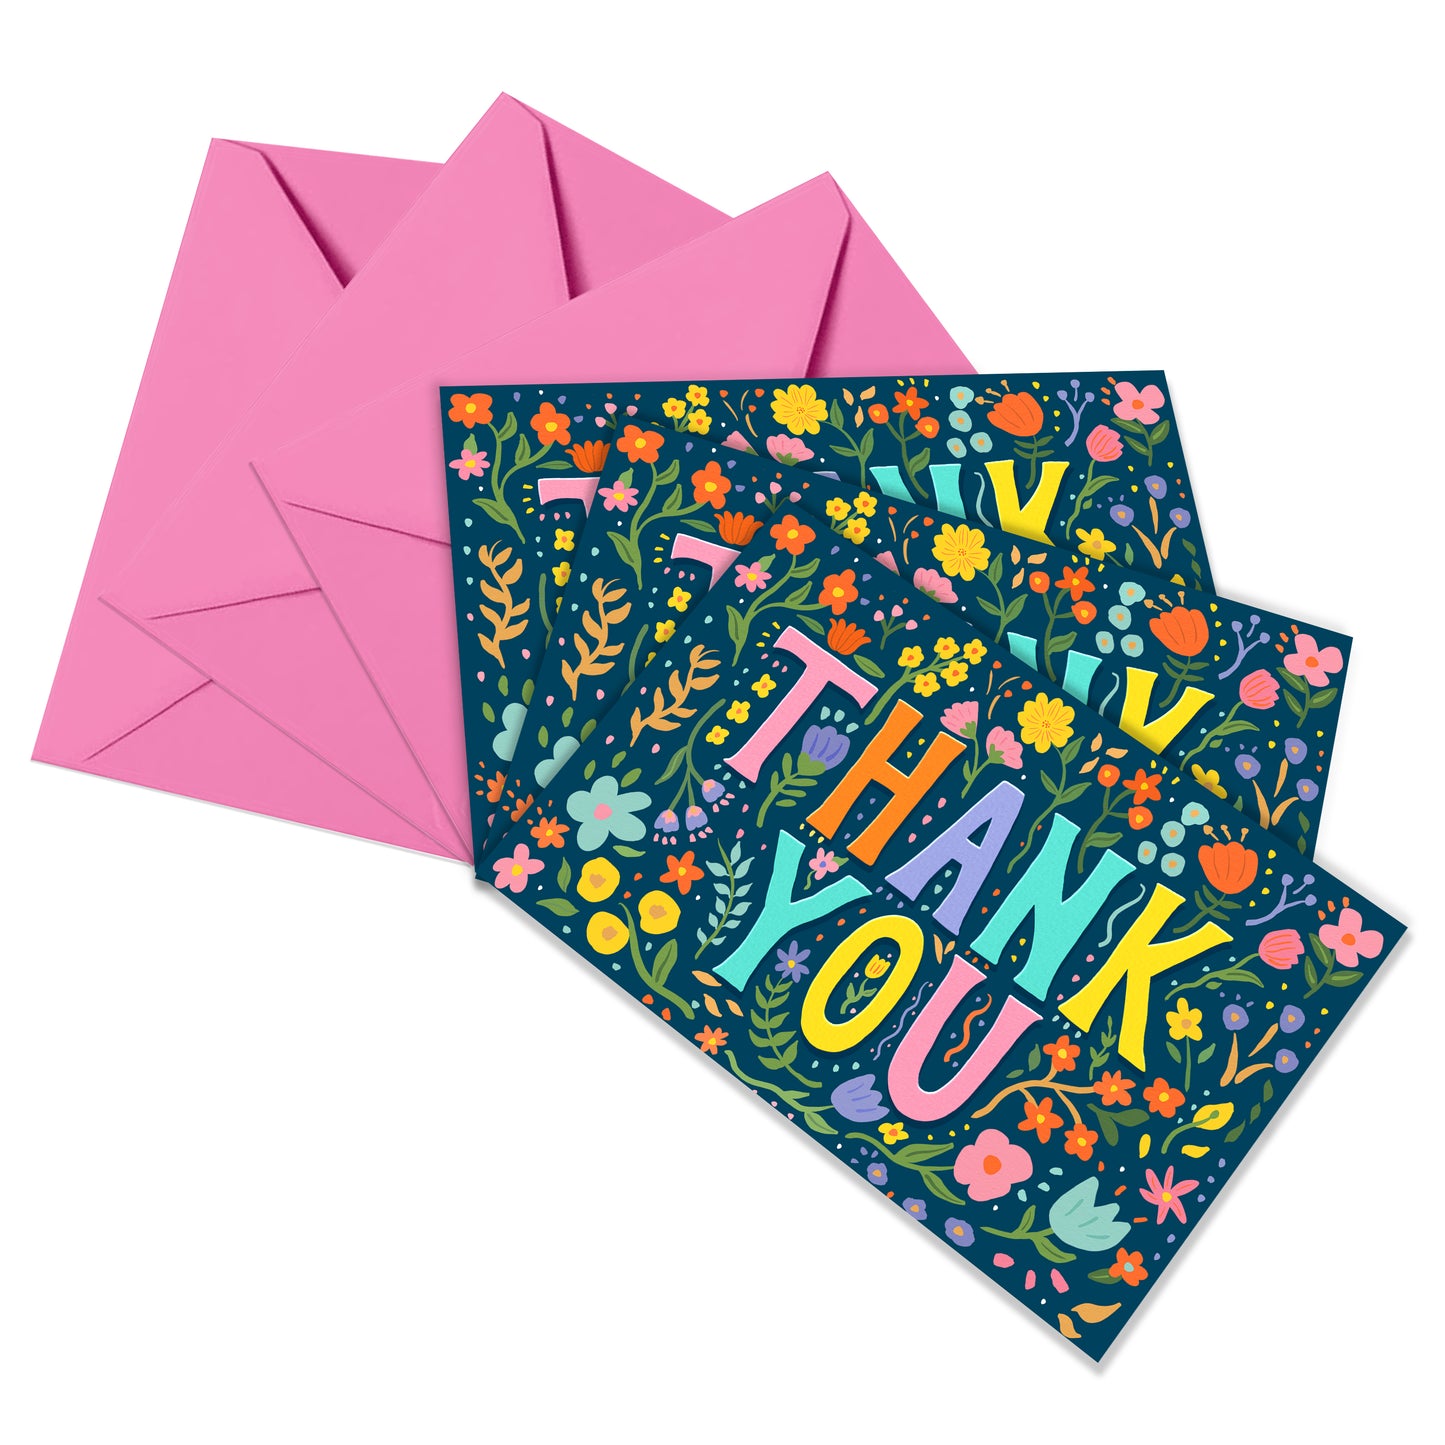 Embossed Thank You Cards Multipack - Floral Thank You Cards - Pack of 24 Cards